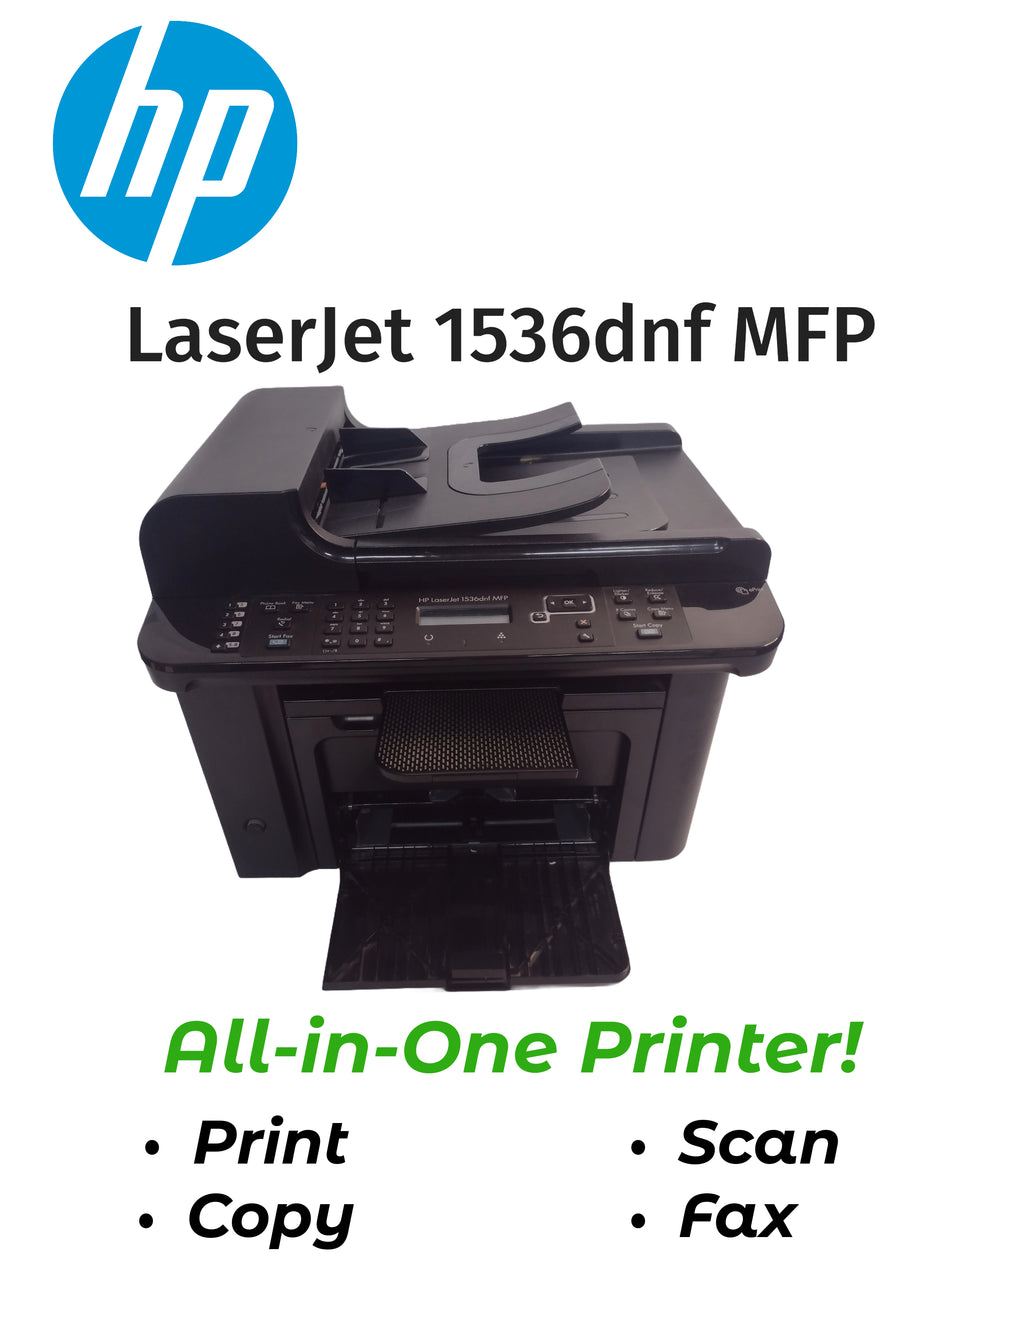 HP LaserJet 1536dnf MFP All-in-One Printer (print, copy, scan, fax), 22K pages!